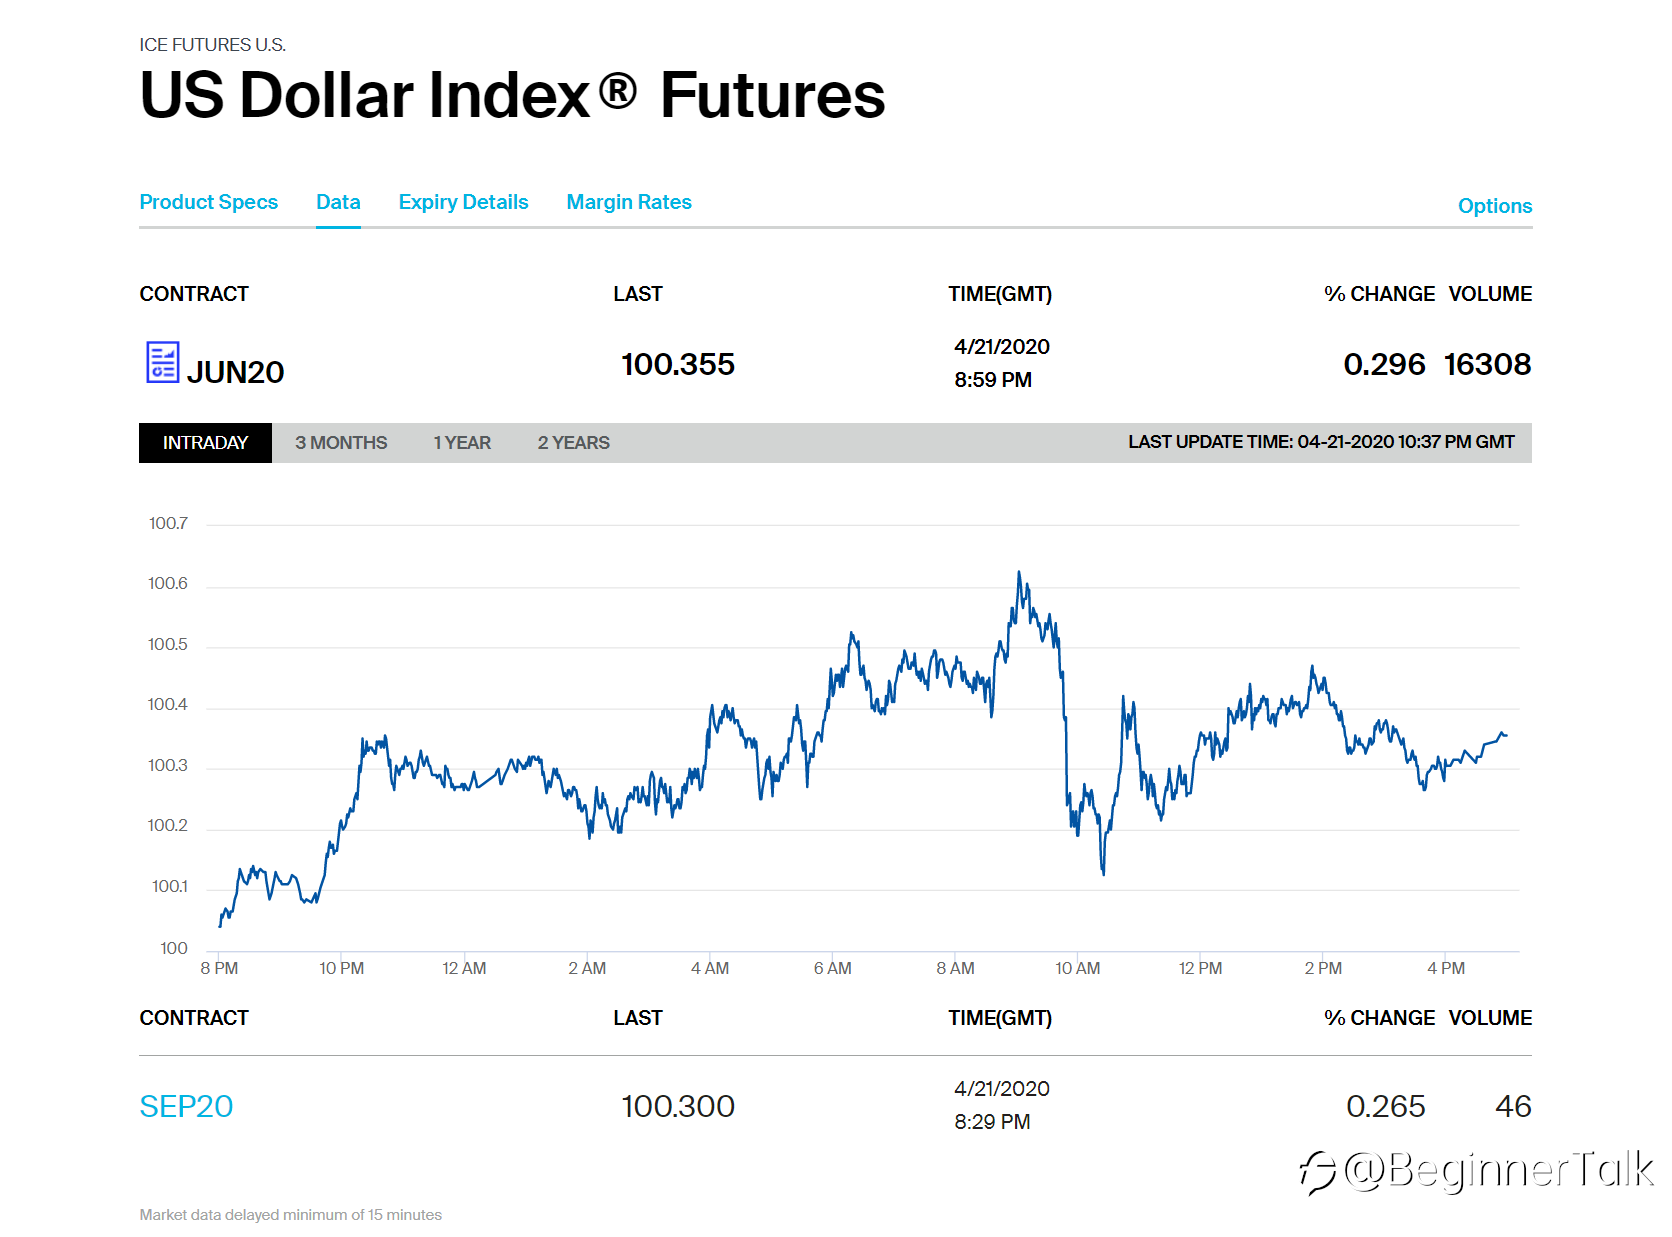 What is the US Dollar Index (USDX)?